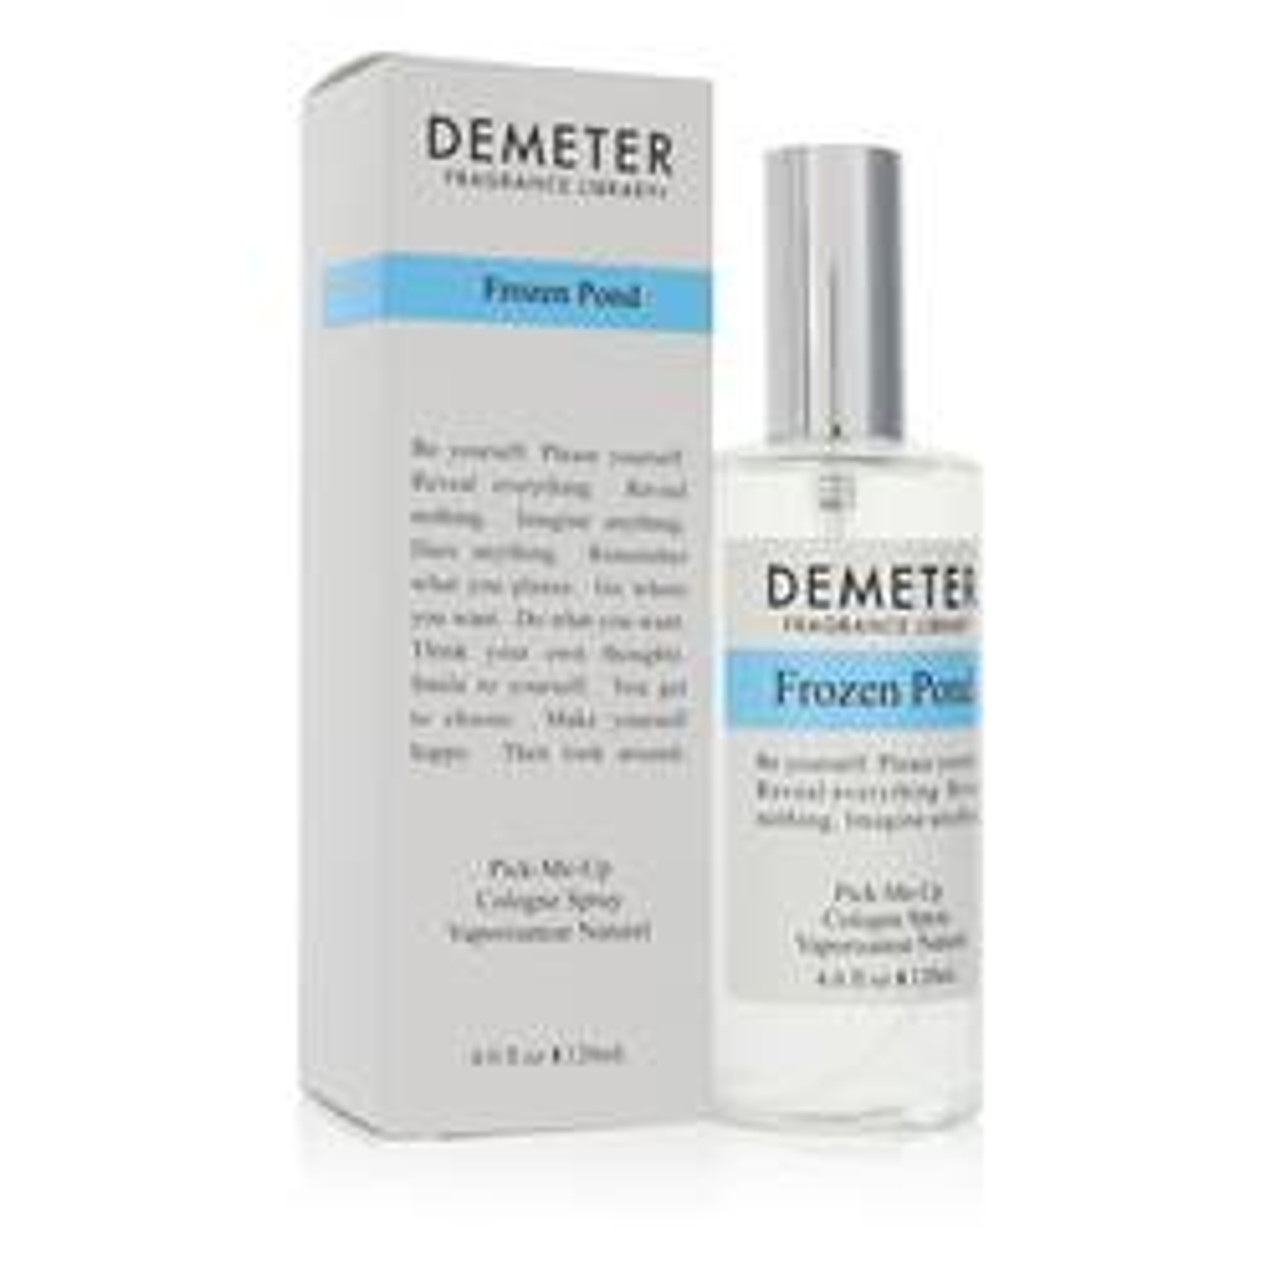 Demeter Frozen Pond Perfume By Demeter Cologne Spray (Unisex) 4 oz for Women - [From 79.50 - Choose pk Qty ] - *Ships from Miami